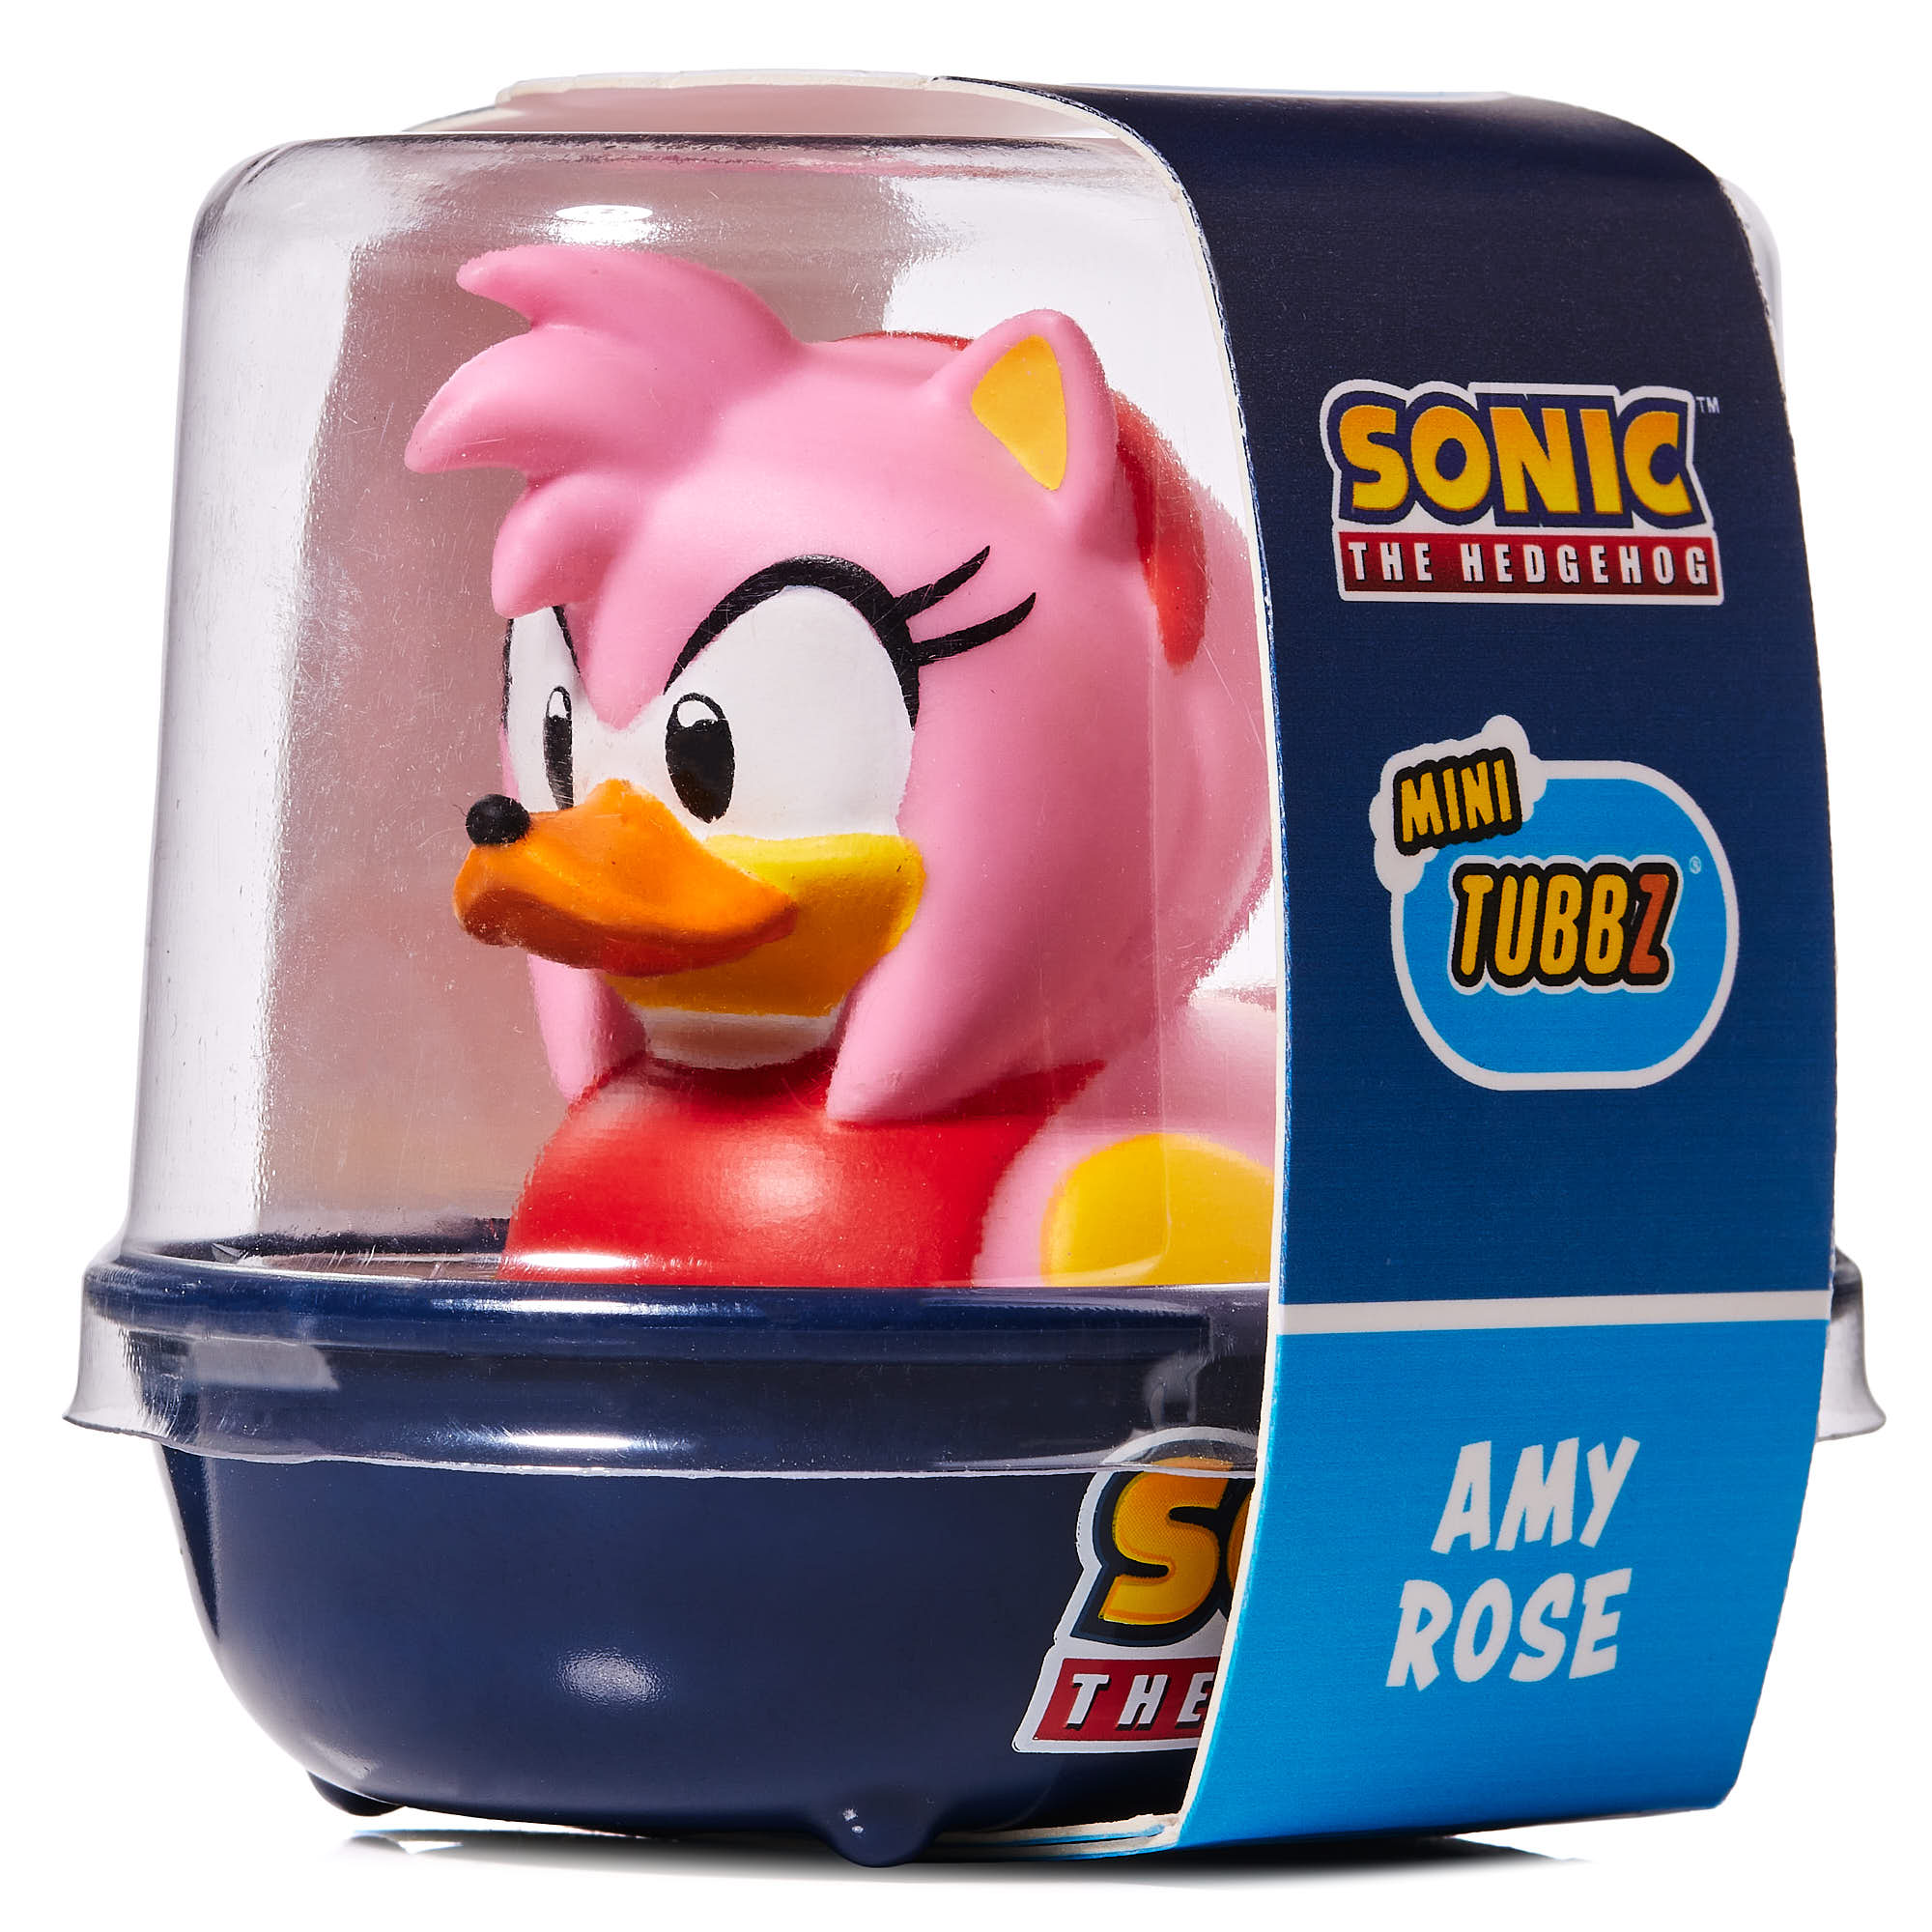 Official Sonic the Hedgehog Amy Rose Mini TUBBZ画像